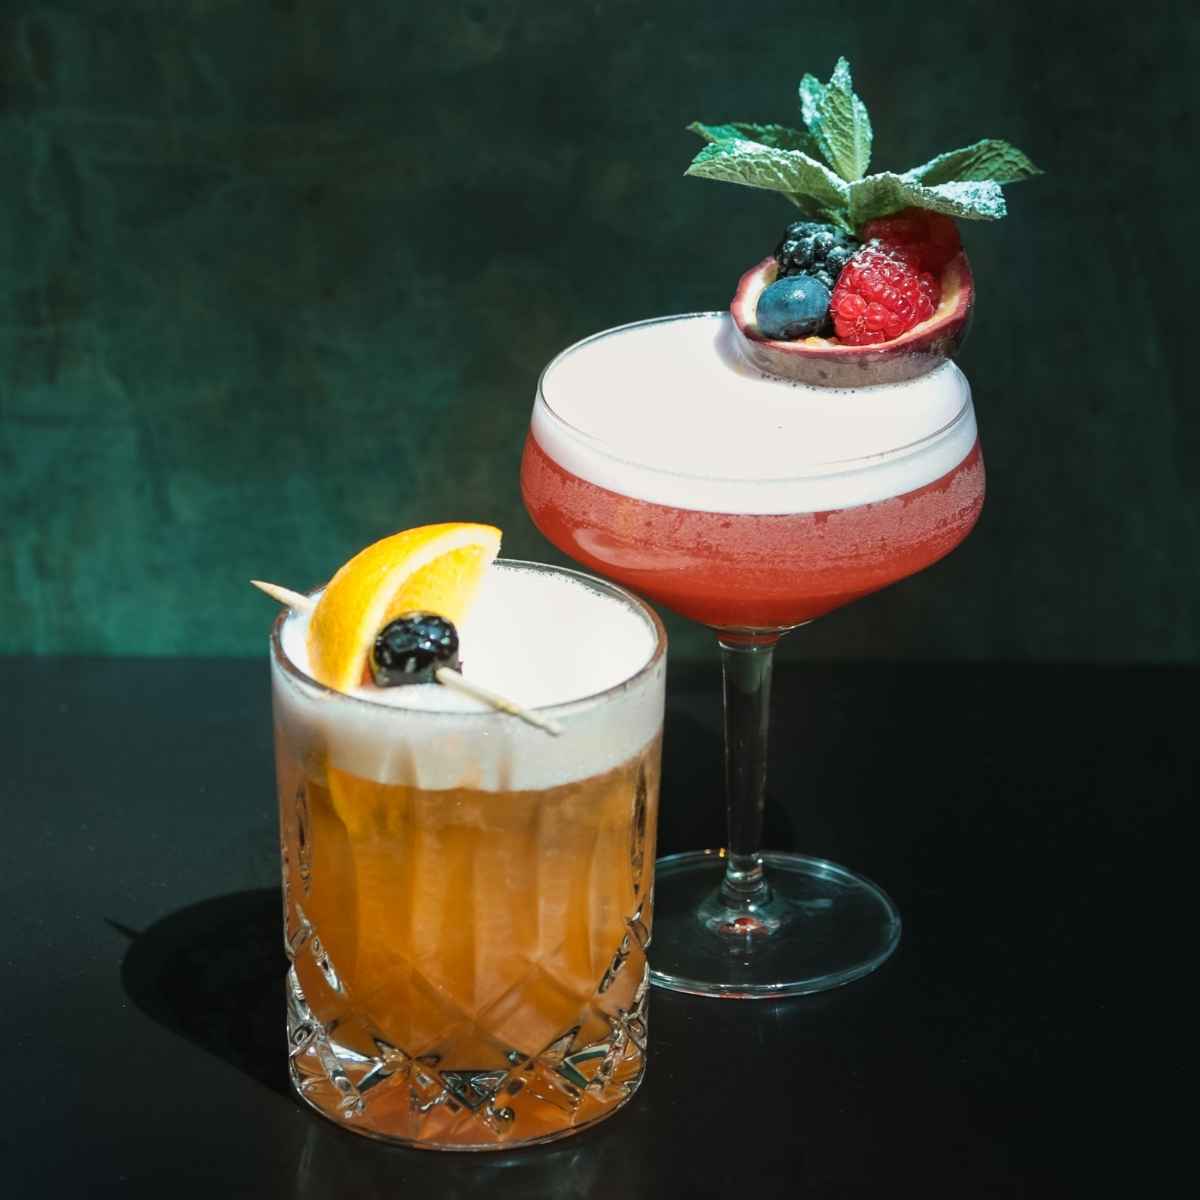 Best Fruity Drinks to order at a bar